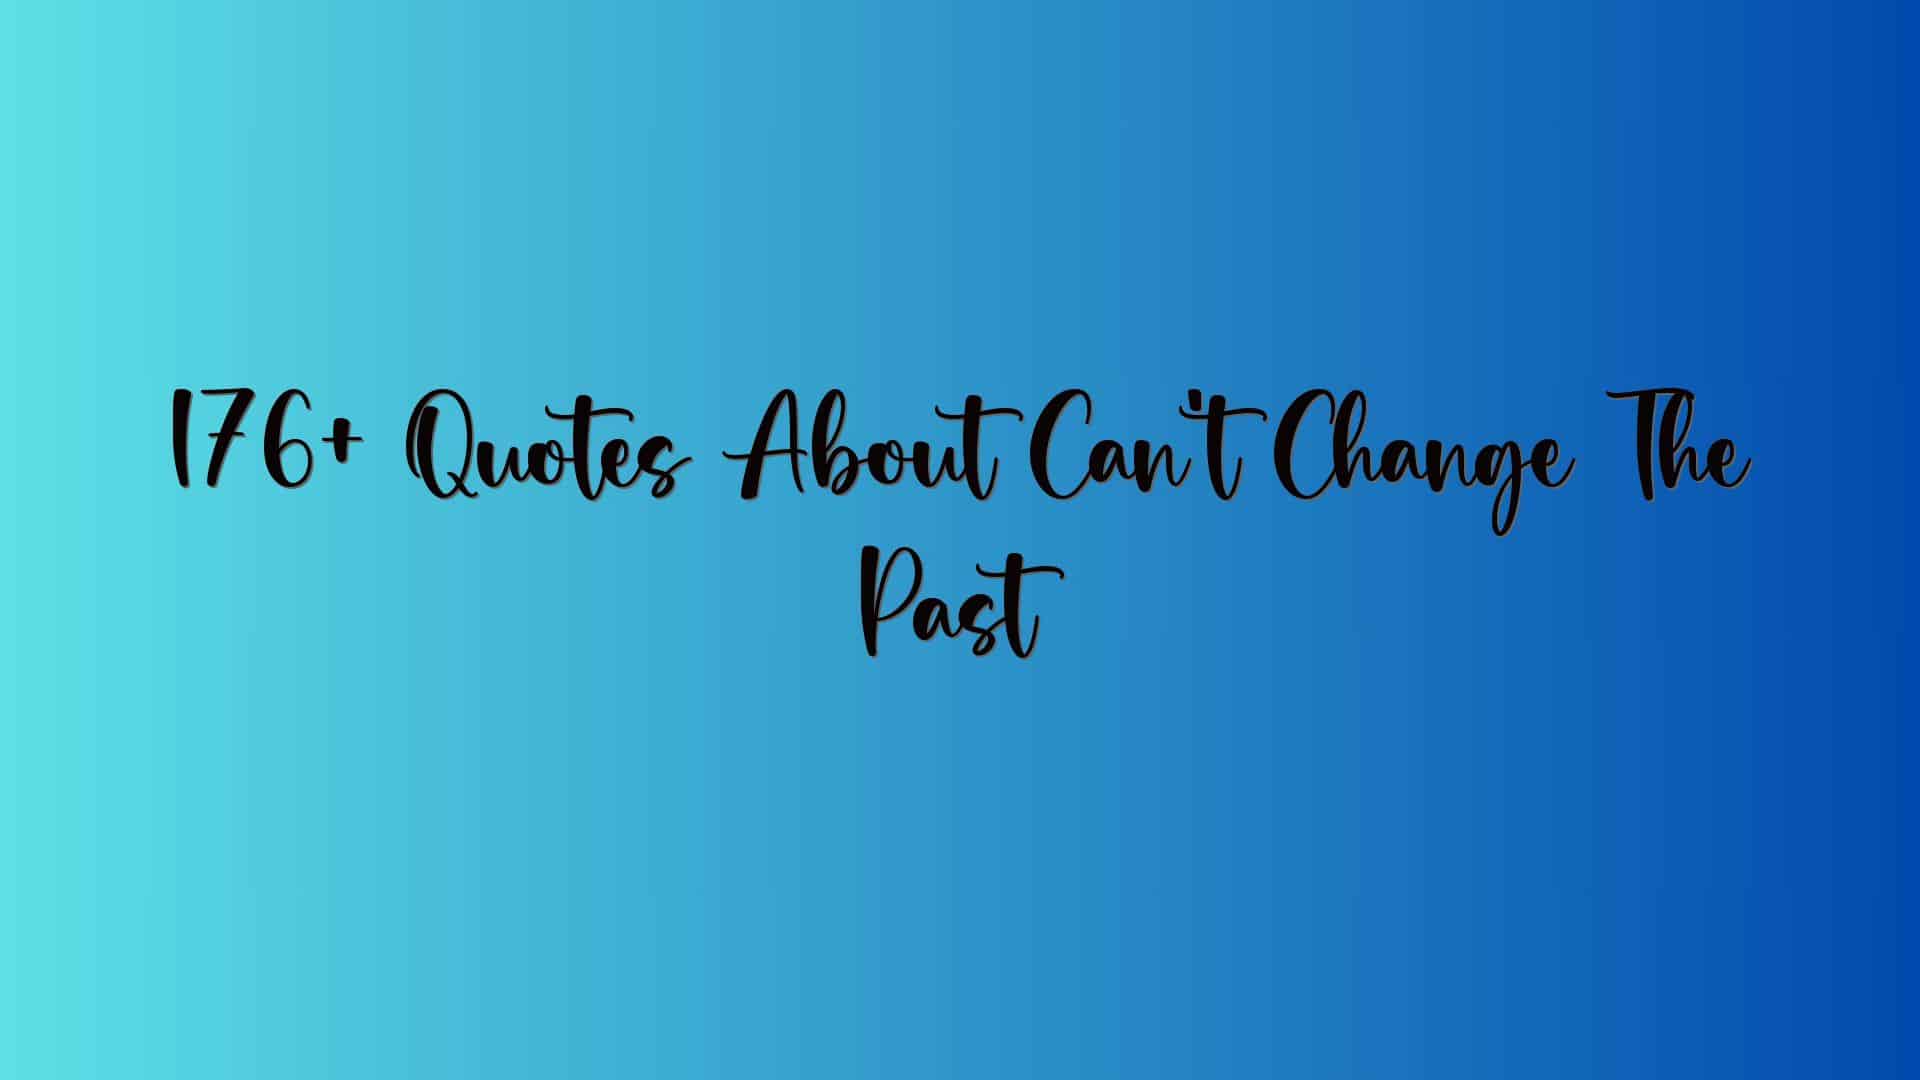 176+ Quotes About Can’t Change The Past